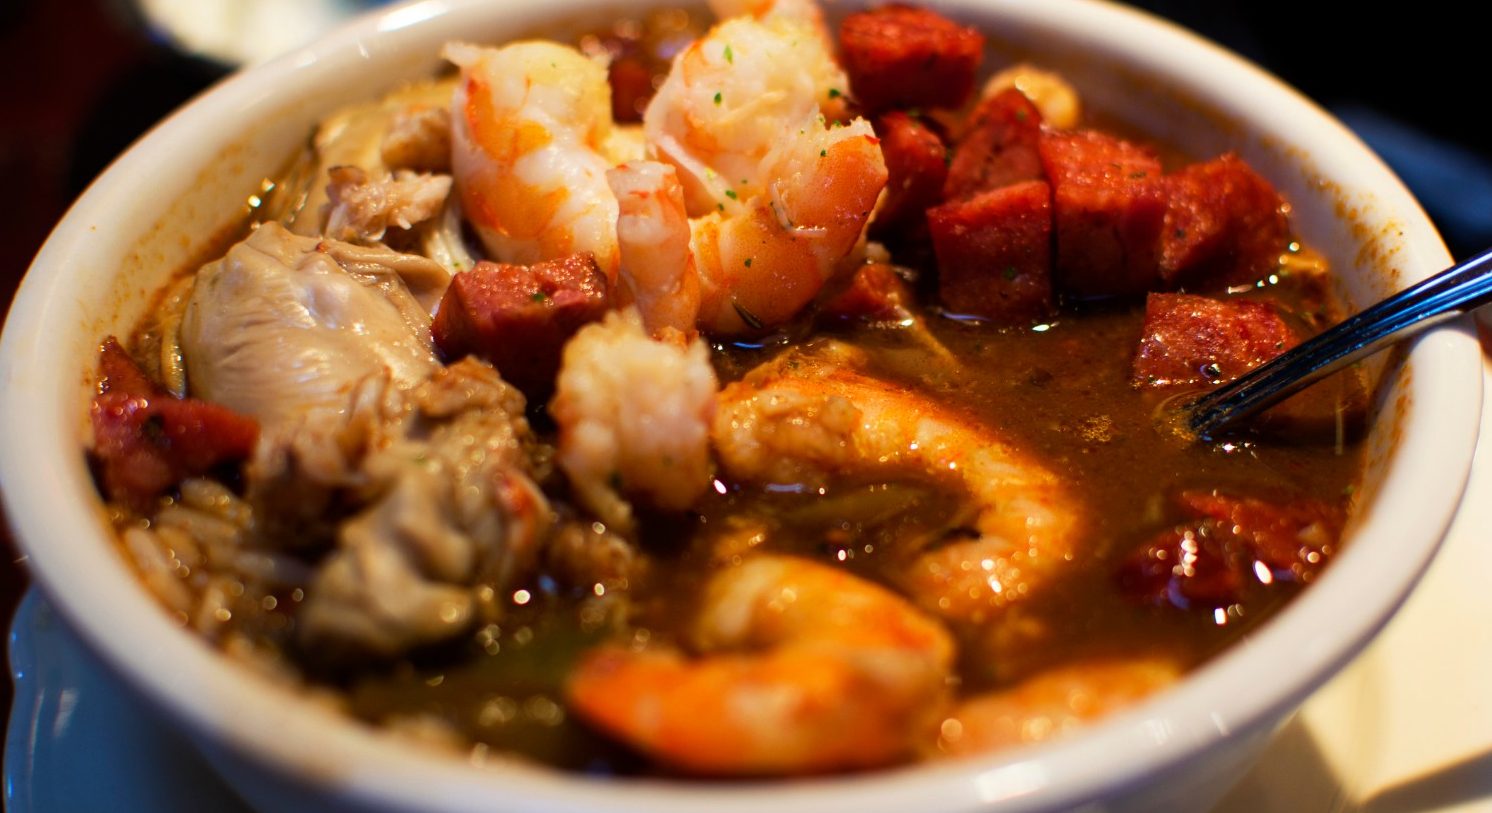 Let Us Tell You About the Best Gumbo in New Orleans